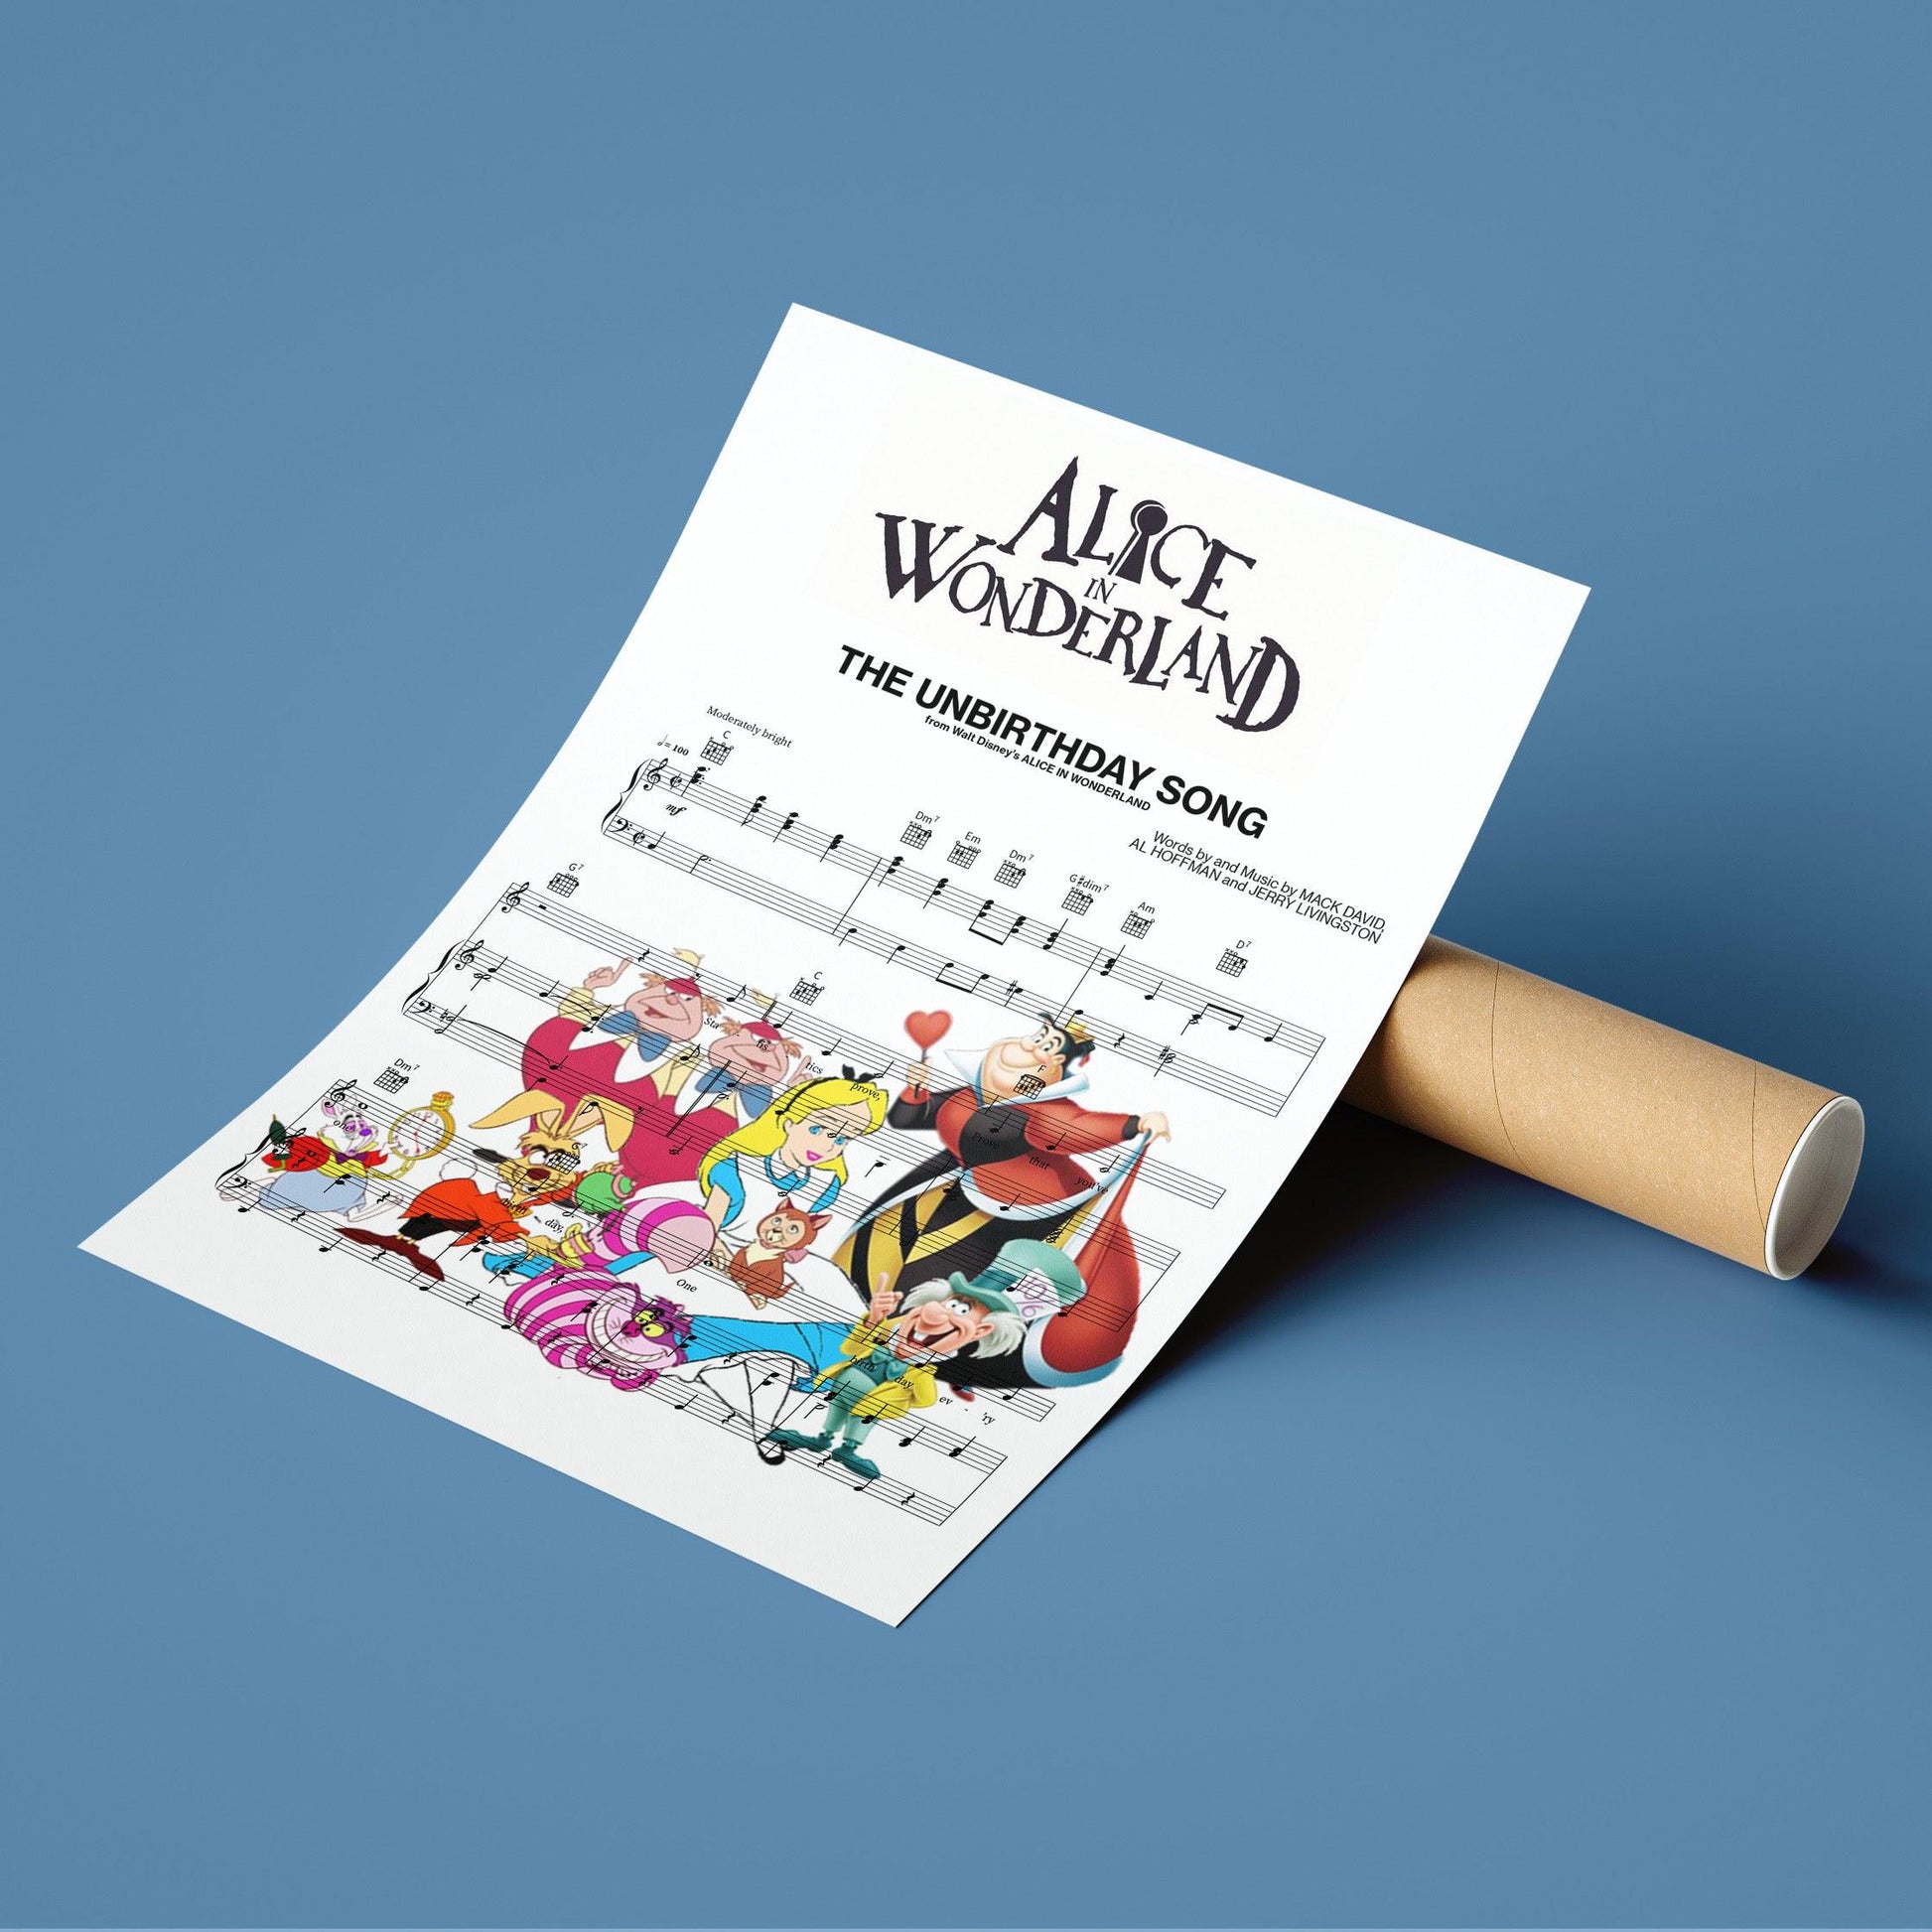 Alice in Wonderland - The unbirthday song Print | Song Music Sheet Notes Print   Everyone has a favorite Song lyric prints and Alice in Wonderland now you can show the score as printed staff. The personal favorite song lyrics art shows the song chosen as the score.